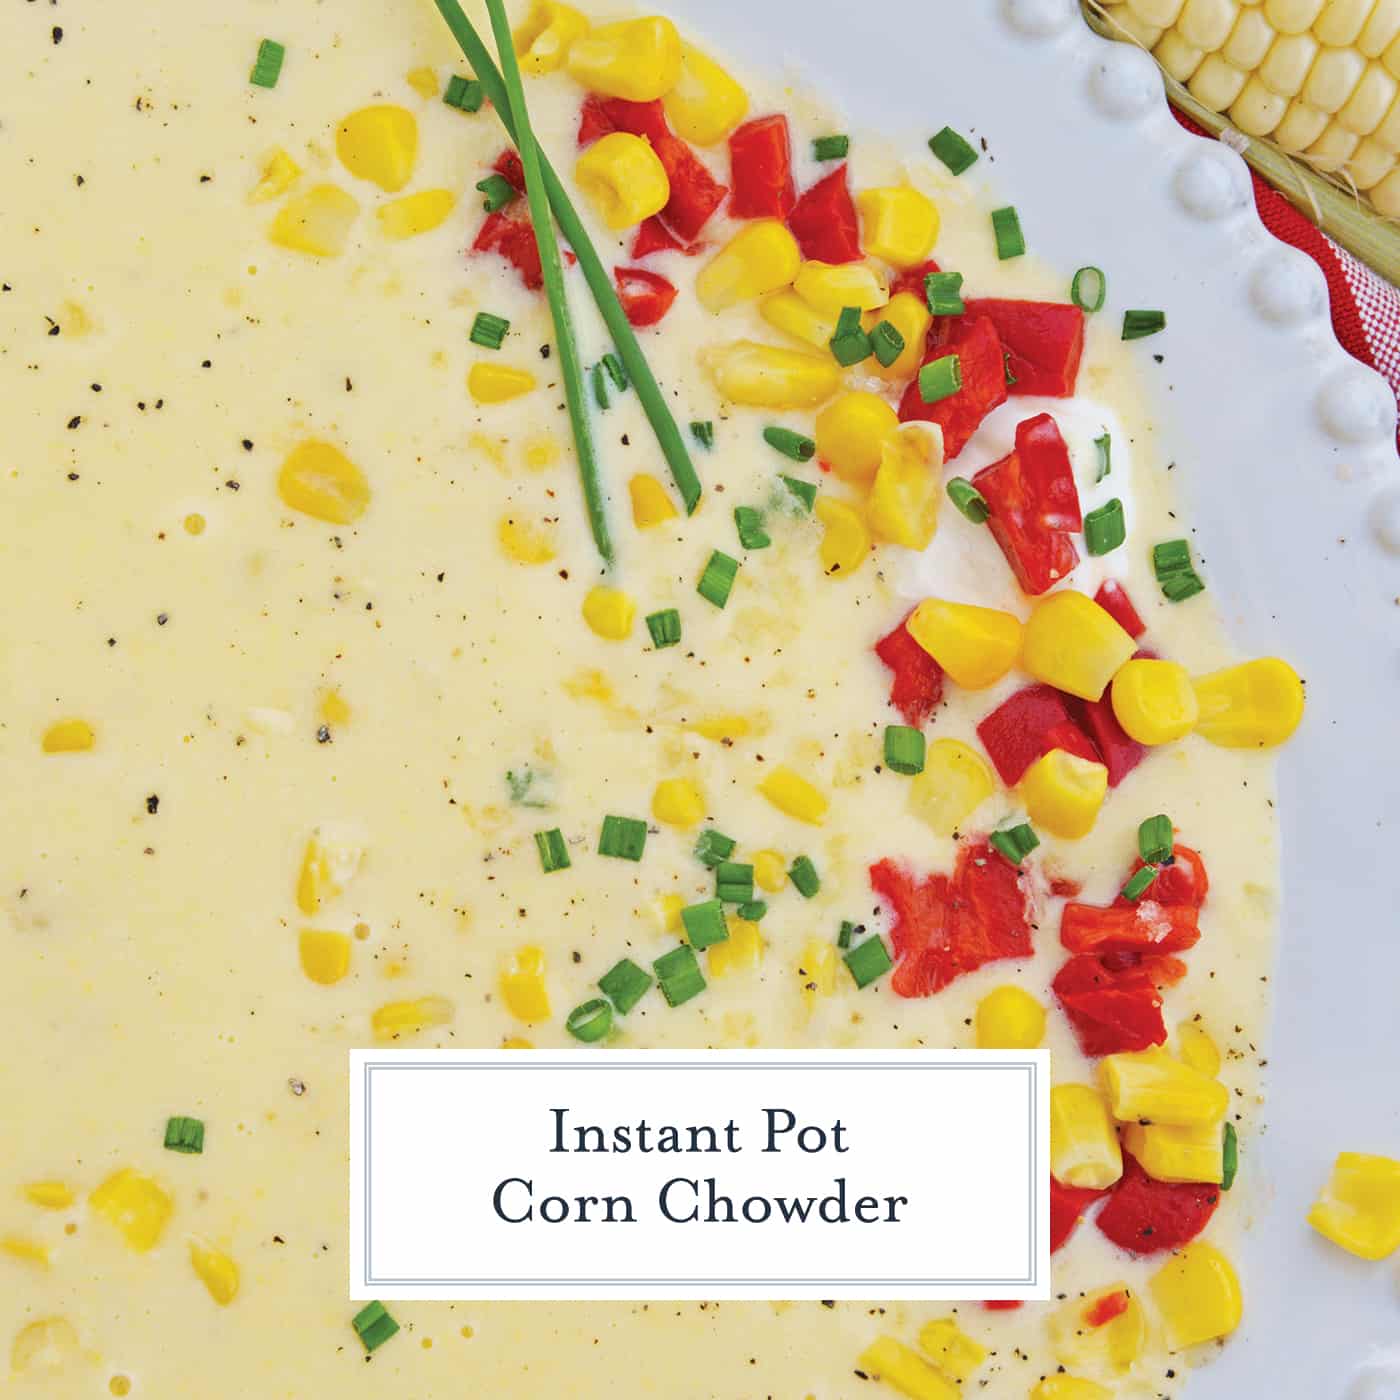 Instant Pot Corn Chowder turns an already easy corn chowder recipe into a quick, FLAVORFUL and delicious potato corn chowder. Perfect for fall! #cornchowderrecipe #instantpotcornchowder #potatocornchowder www.savoryexperiments.com 